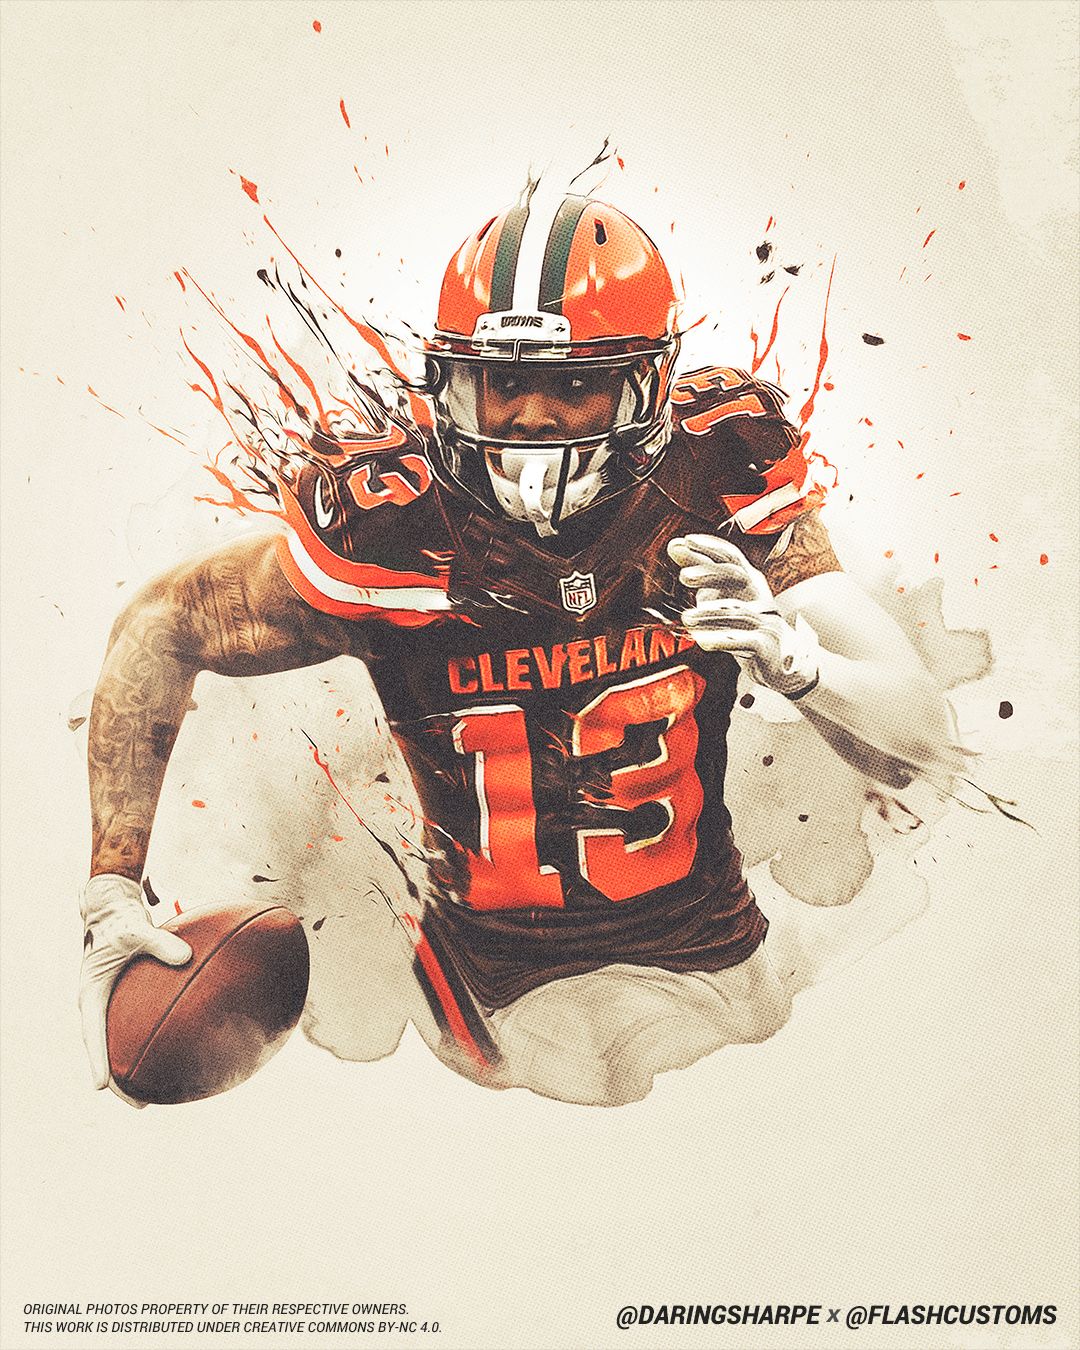 Cool Cleveland Browns Wallpaper